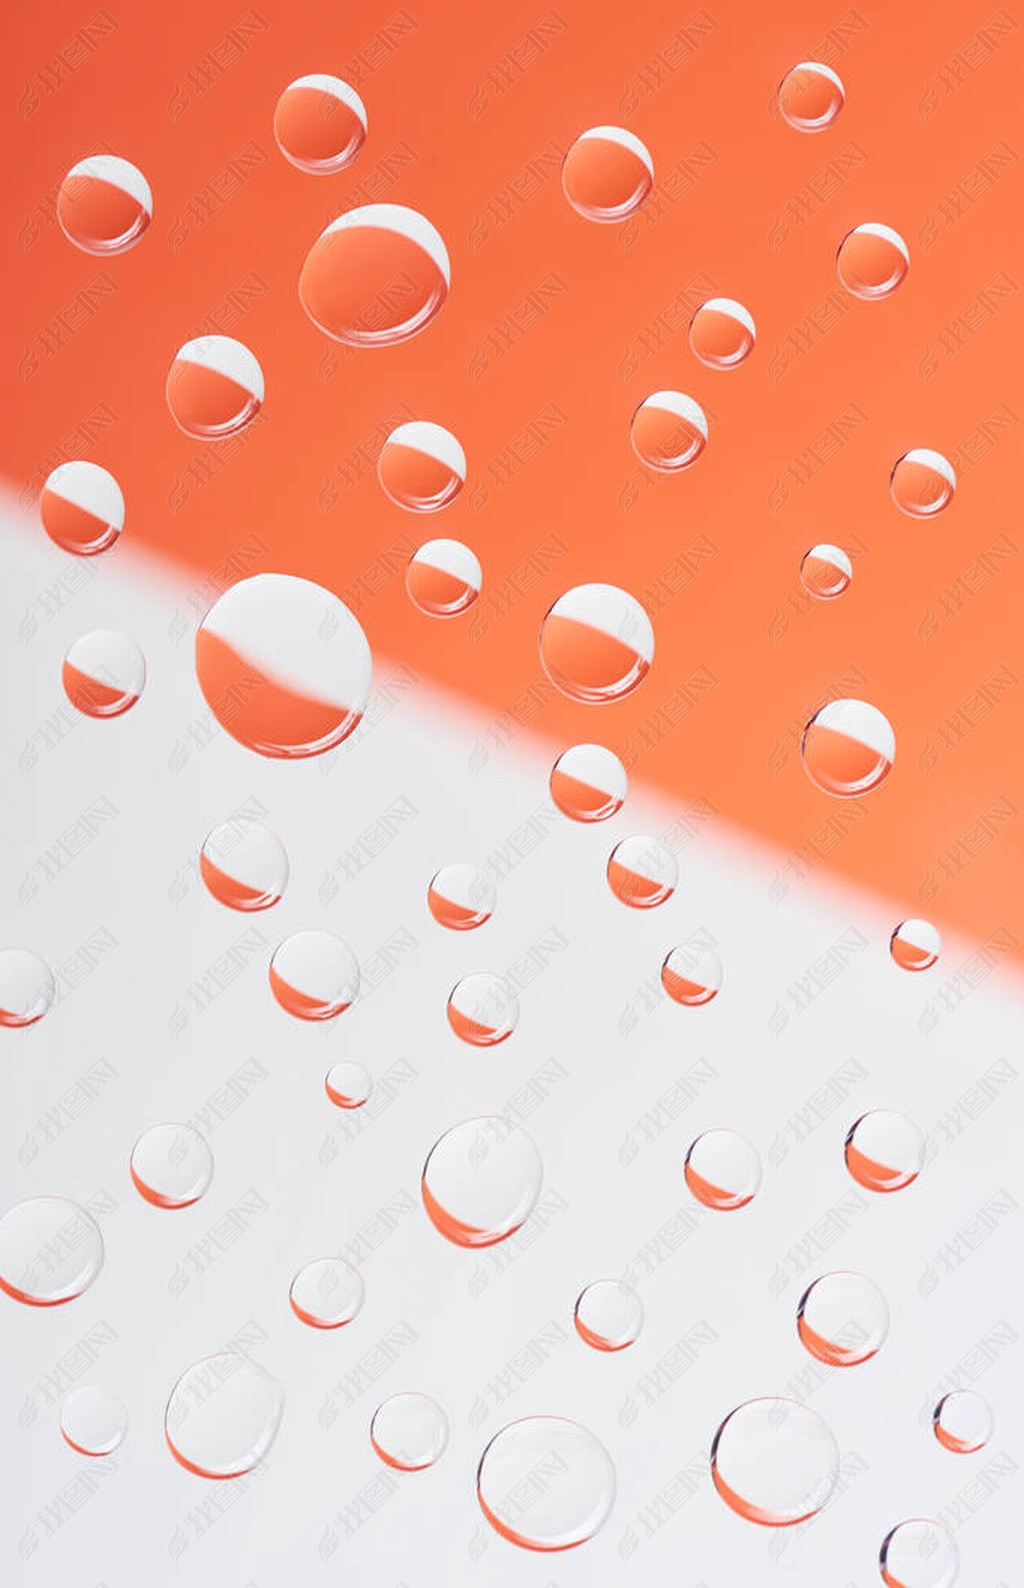 close-up view of transparent calm water drops on white and orange background          